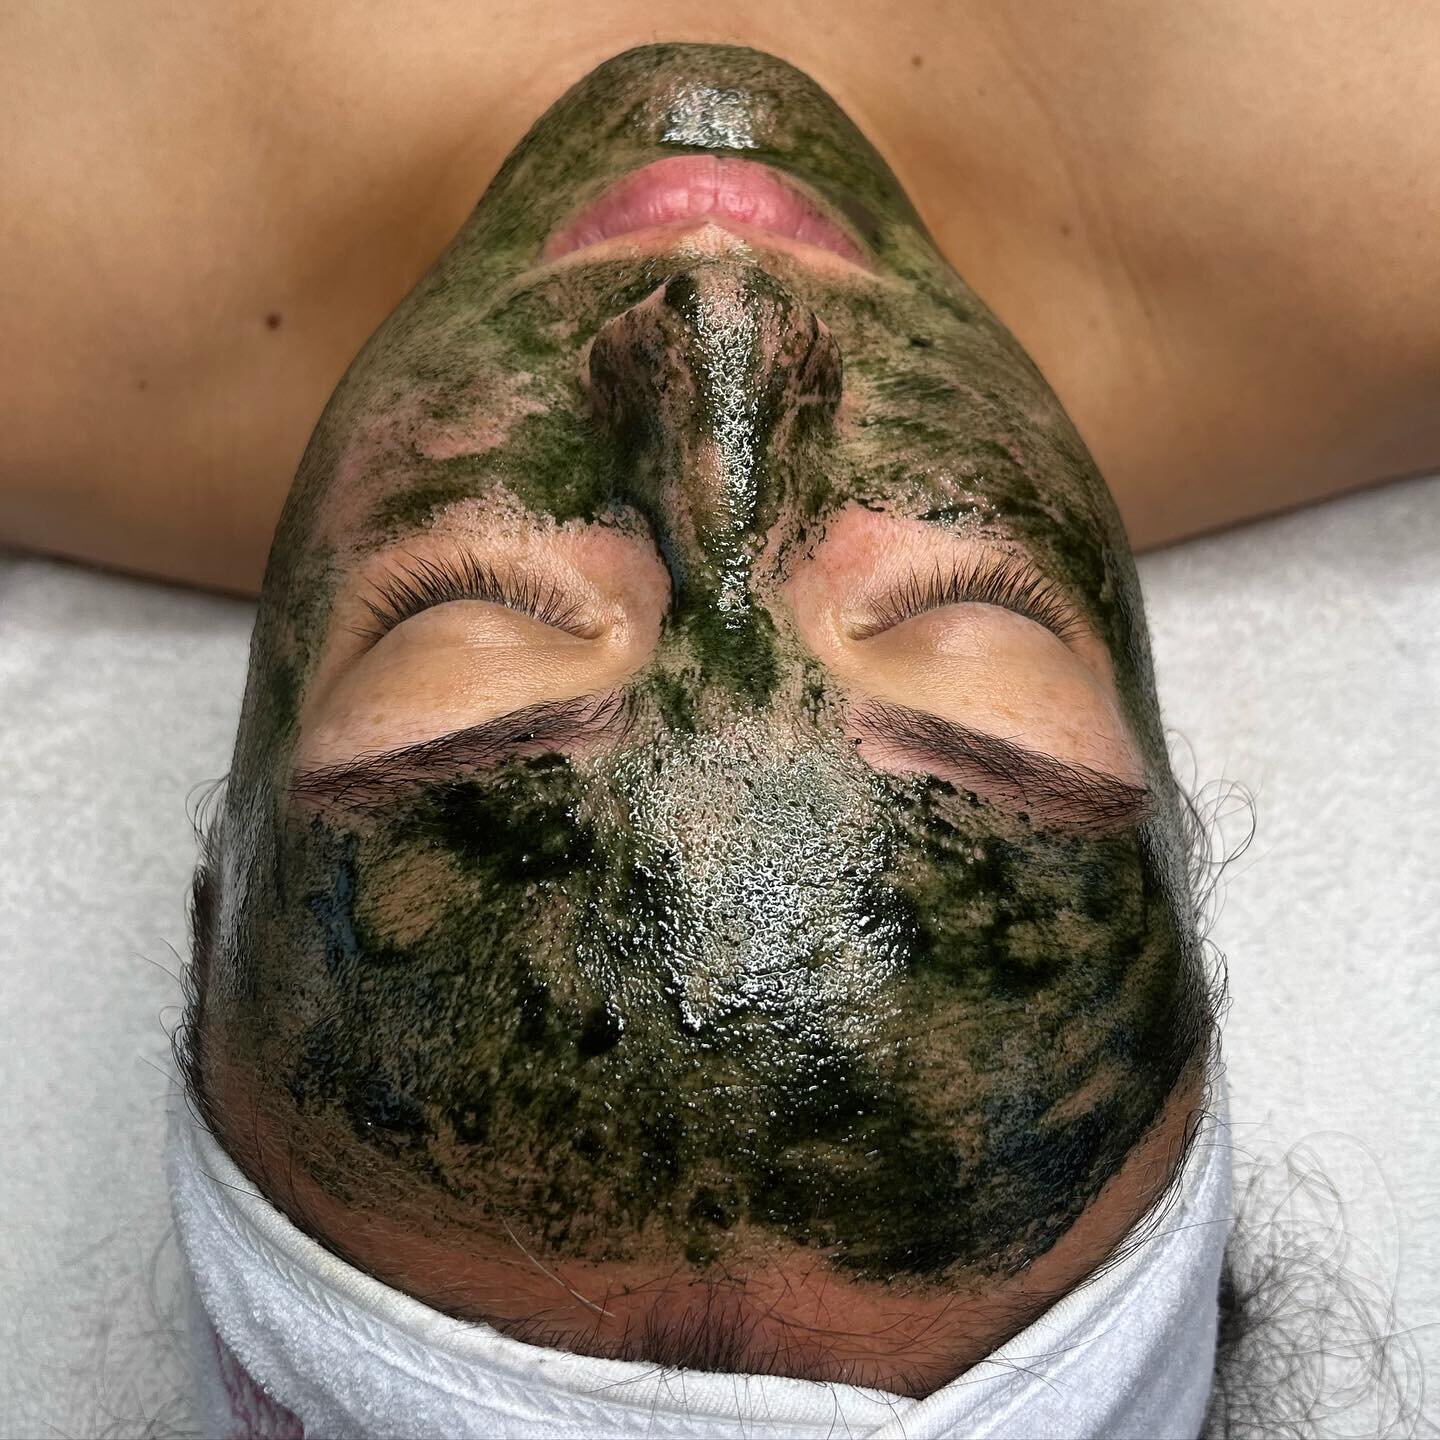 @leahlaniskincare &lsquo;s Mermaid mask is a emerald superfood smoothie for the skin that nourishes, purifies and revitalizes the complexion. Brimming with pristine, nutrient-dense Hawaiian spirulina, raw honey, cleansing sea clay and the most cleanl